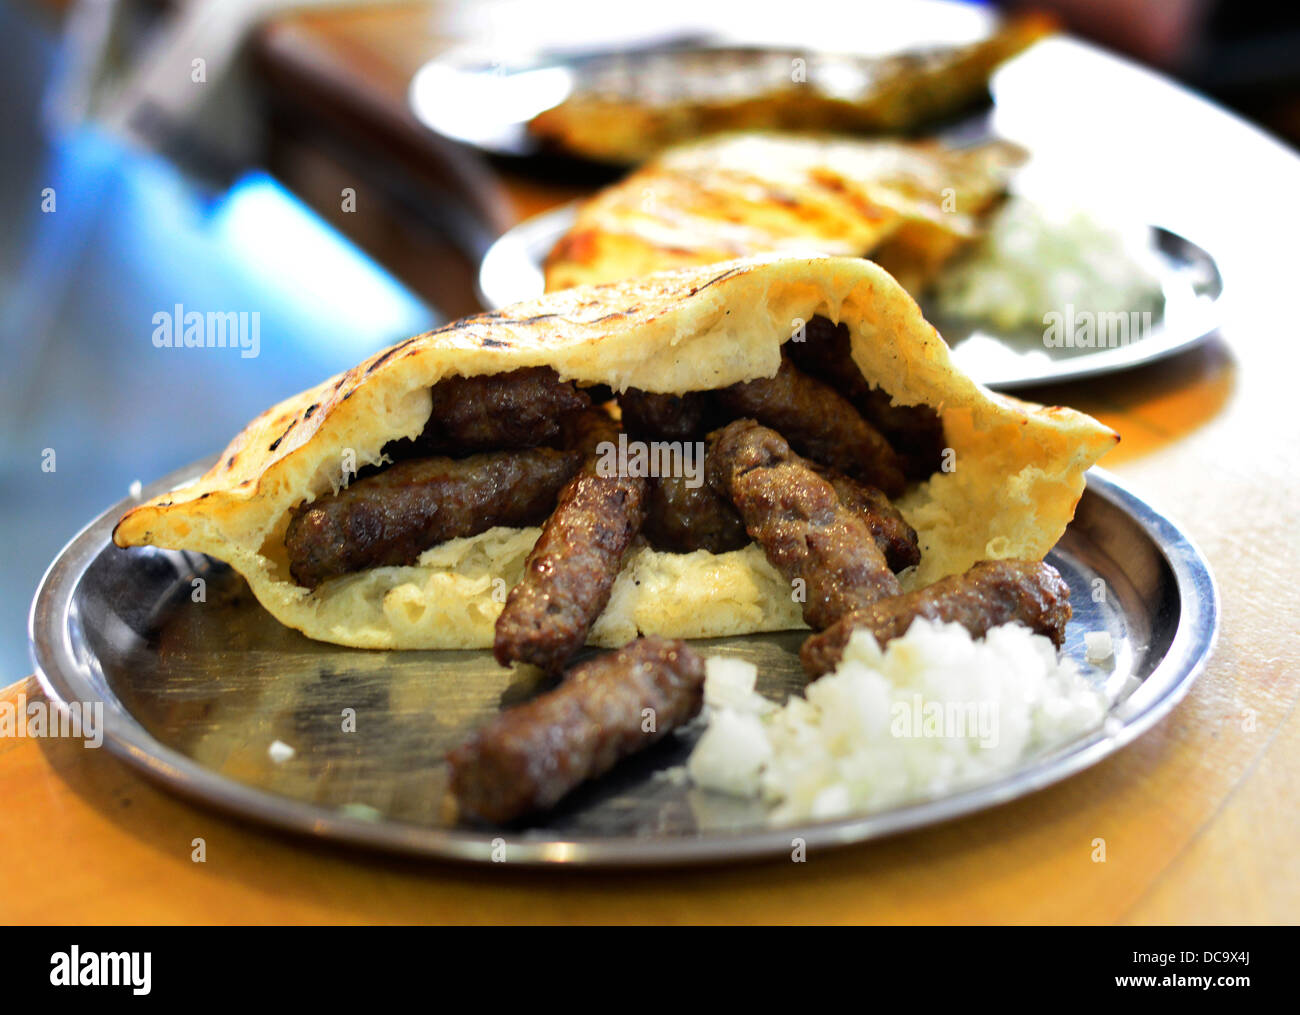 ćevapčići - A minced meat Kebab dish served in a Somun - Thin pita bread is a national dish in Serbia and Bosnia. Stock Photo